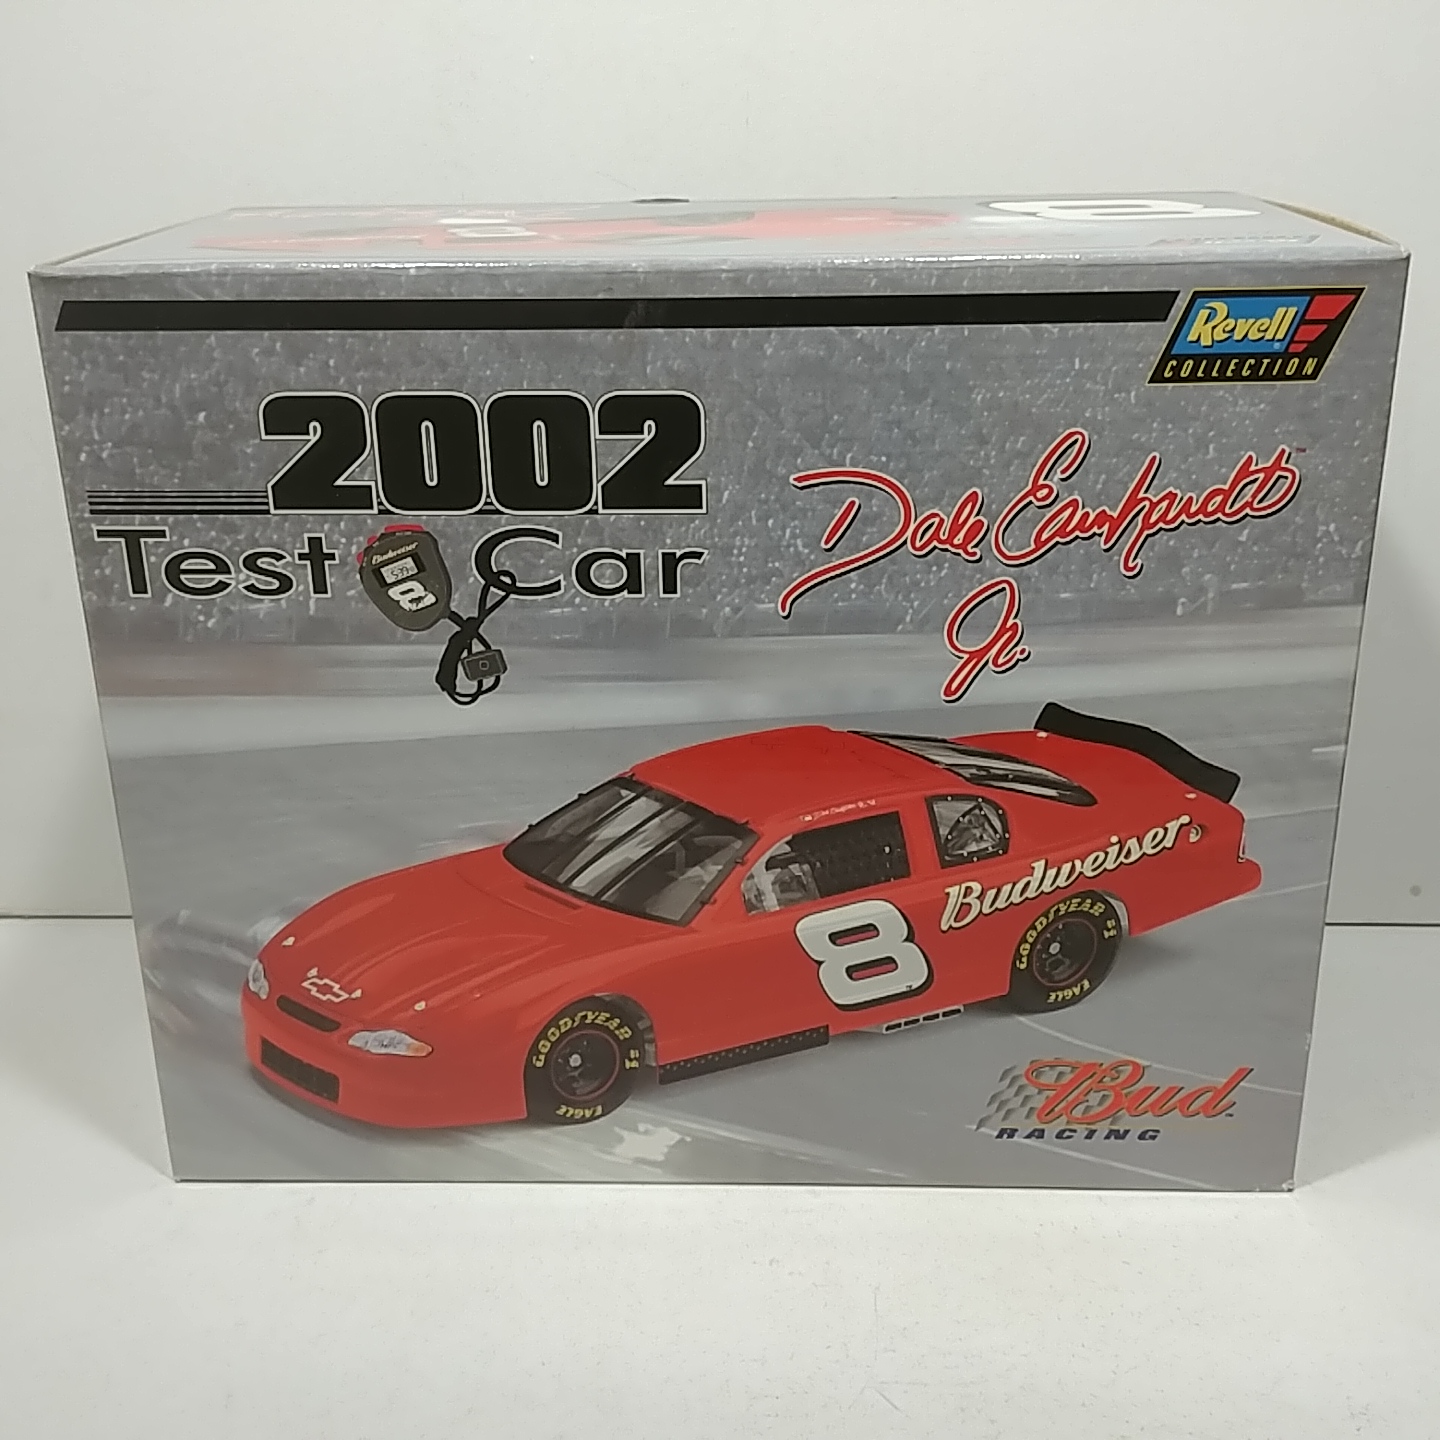 2002 Dale Earnhardt Jr 1/24th Budweiser "Test Car" with stop watch Monte Carlo